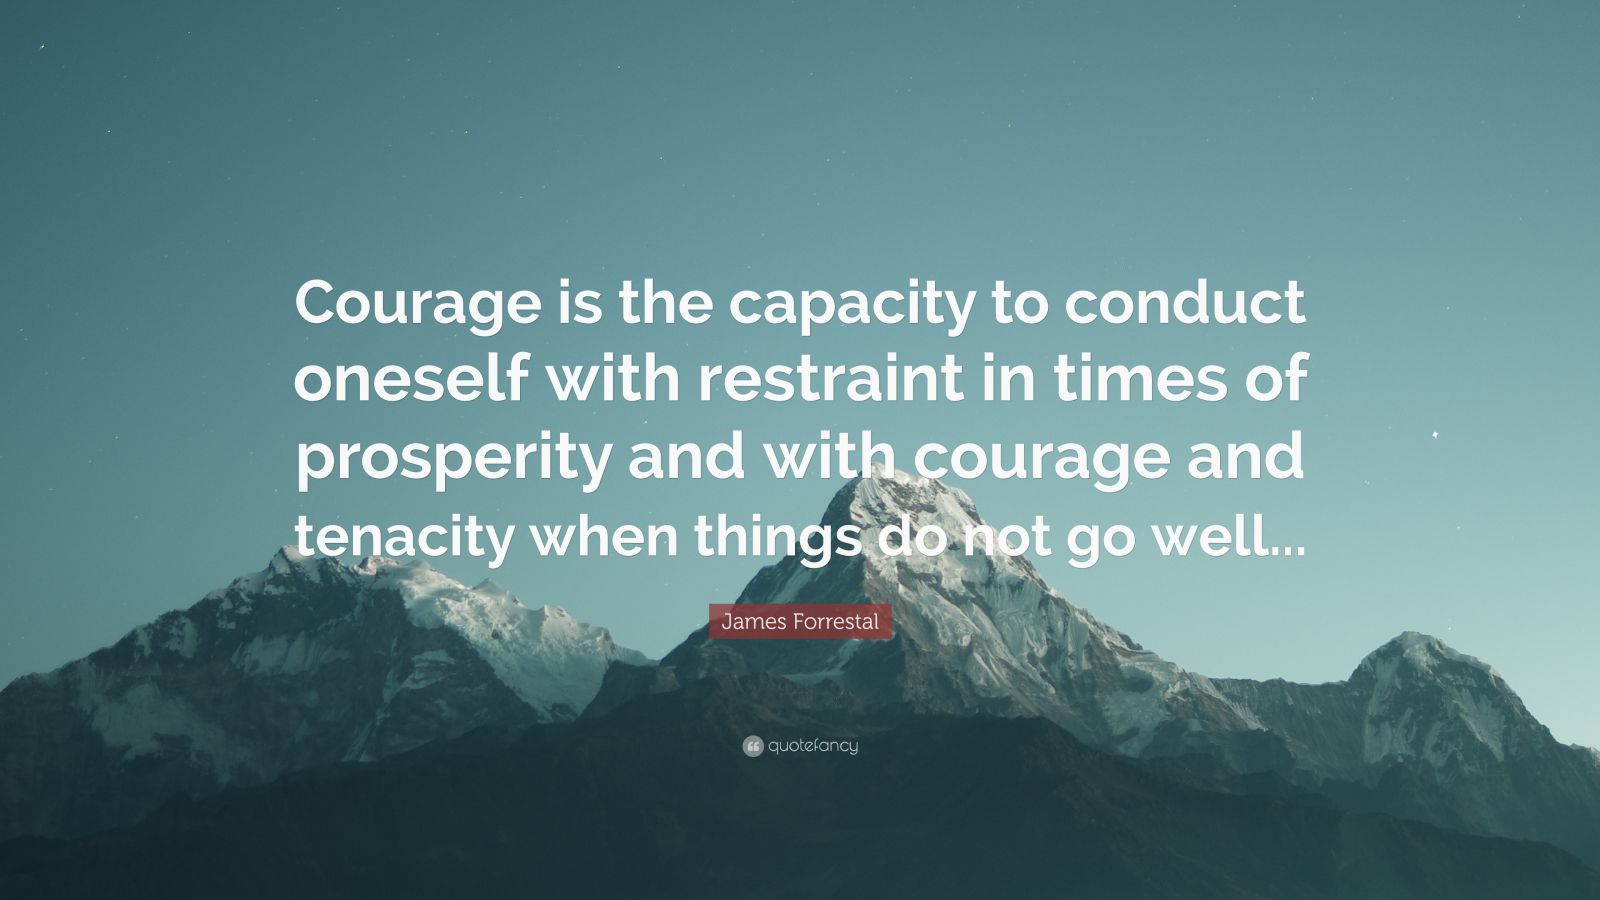 James Forrestal Quote: “Courage is the capacity to conduct oneself with ...